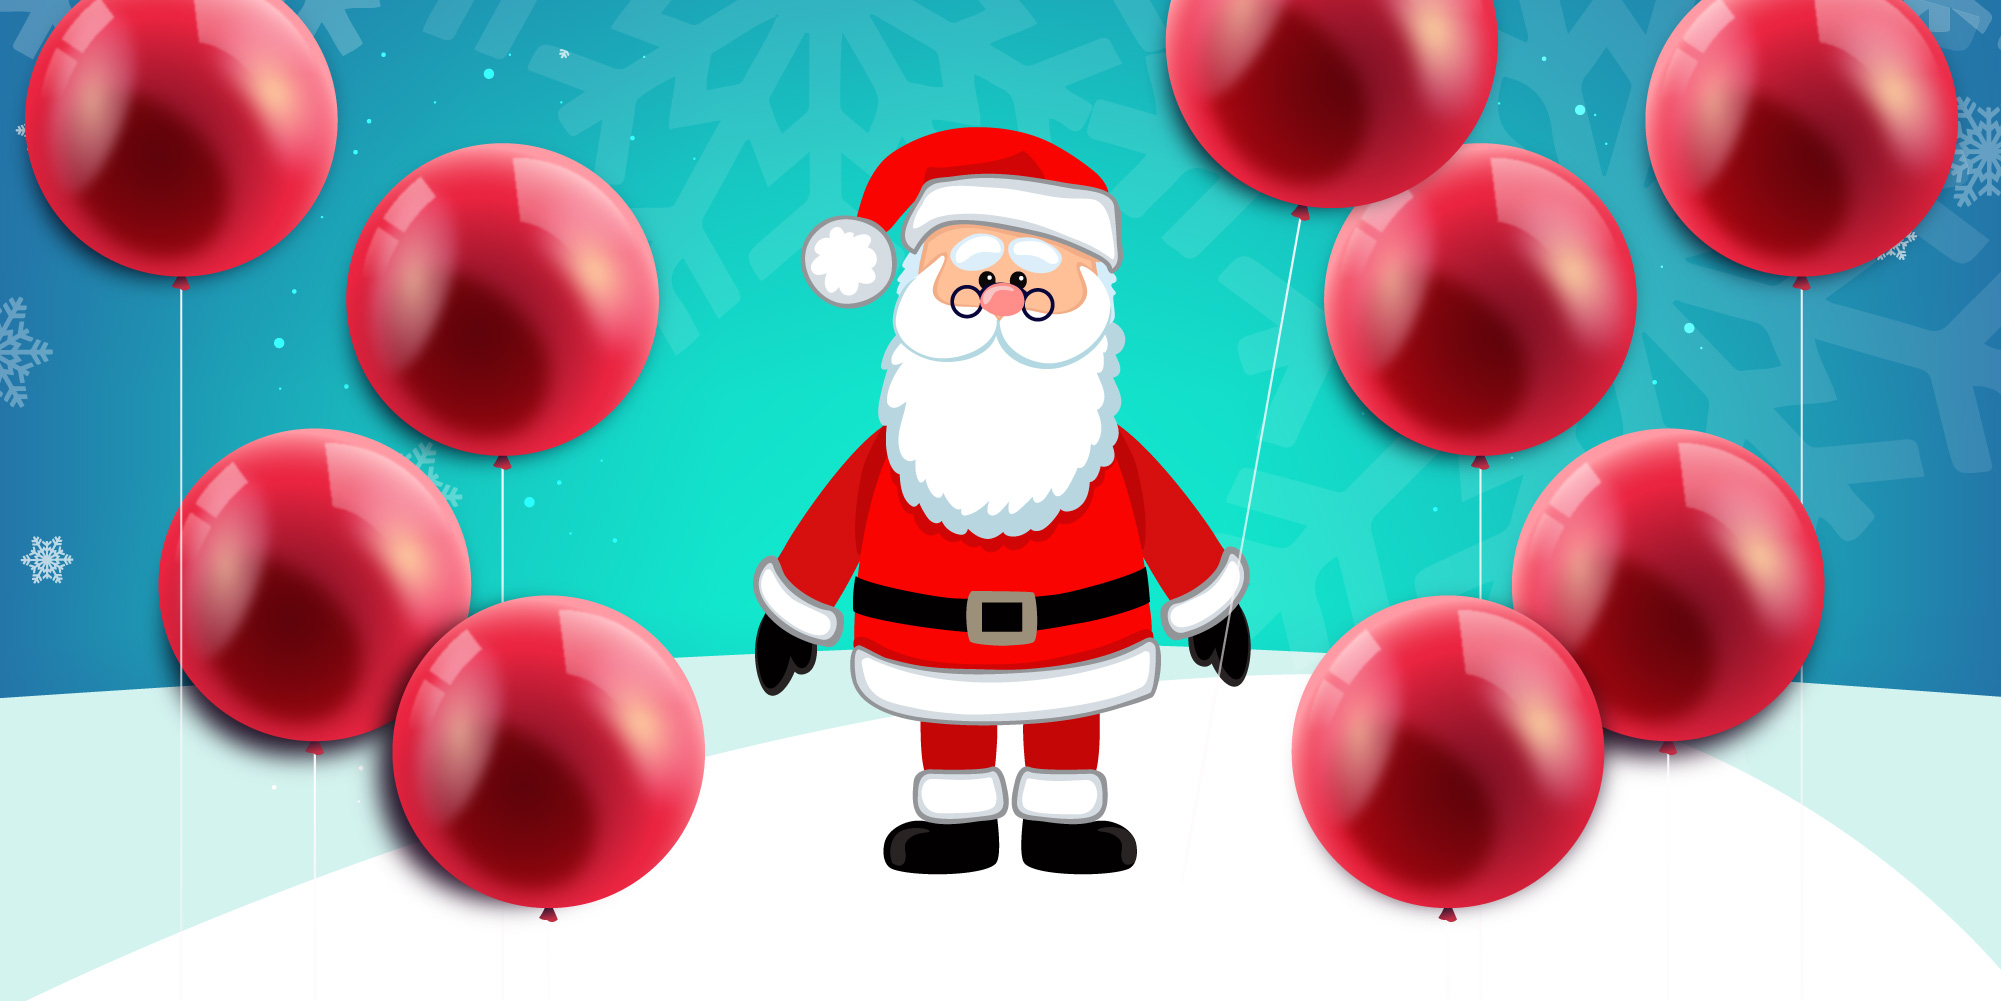 How Old Is Santa Claus